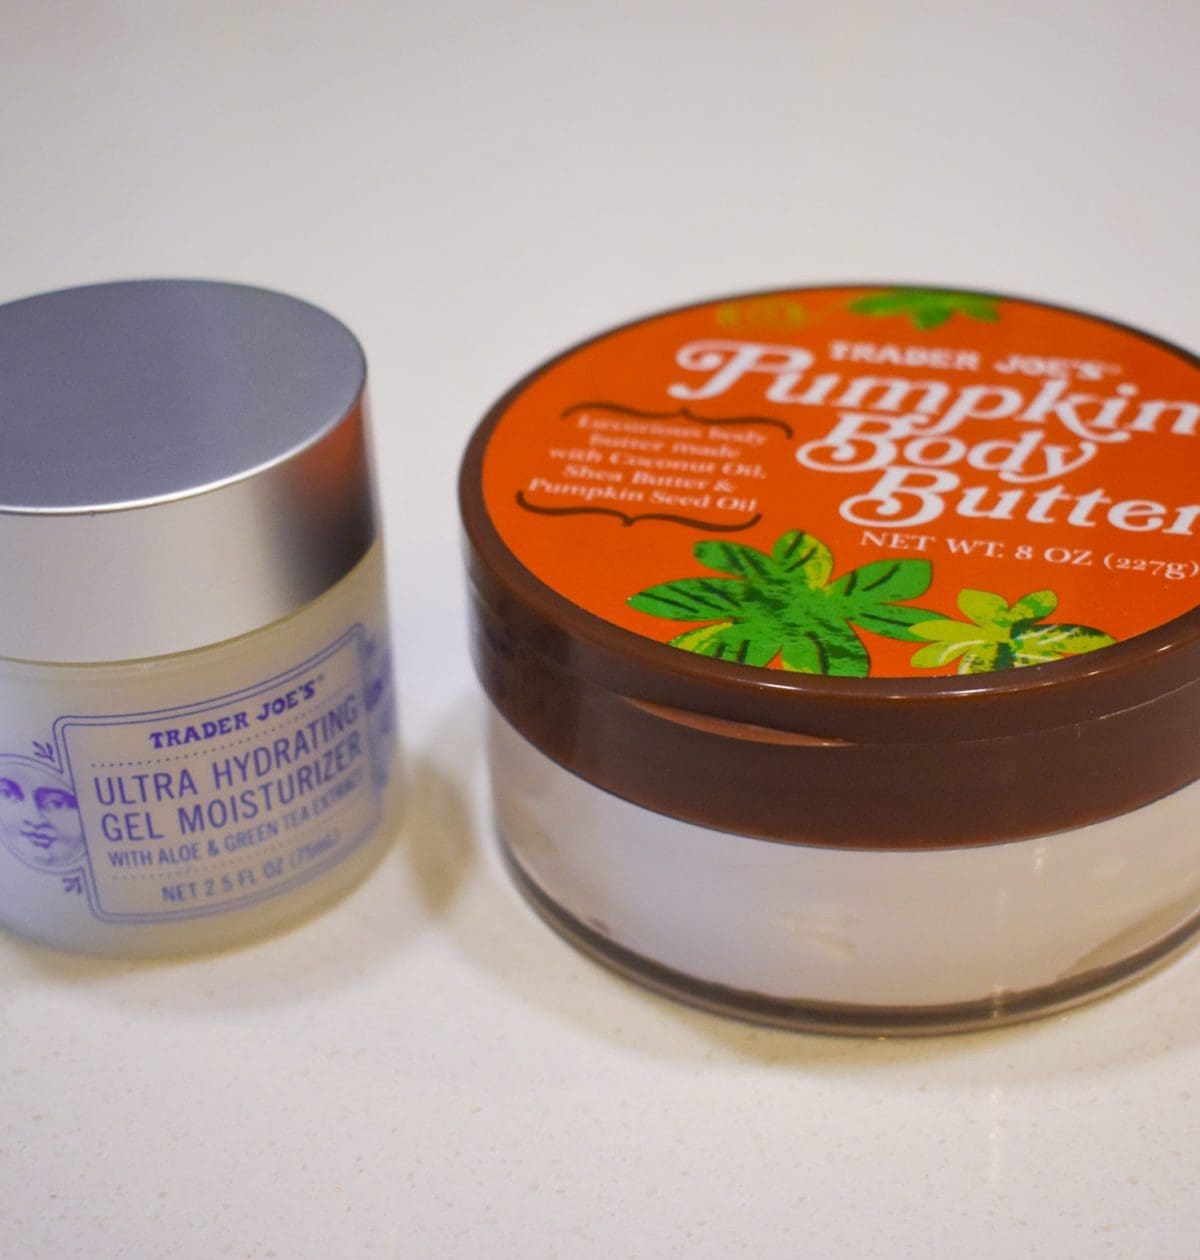 Trader Joe's Pumpkin Body Butter and Trader Joe’s Ultra Hydrating Gel Moisturizer with Aloe and Green Tea Extract -- photo by Christine Csencsitz